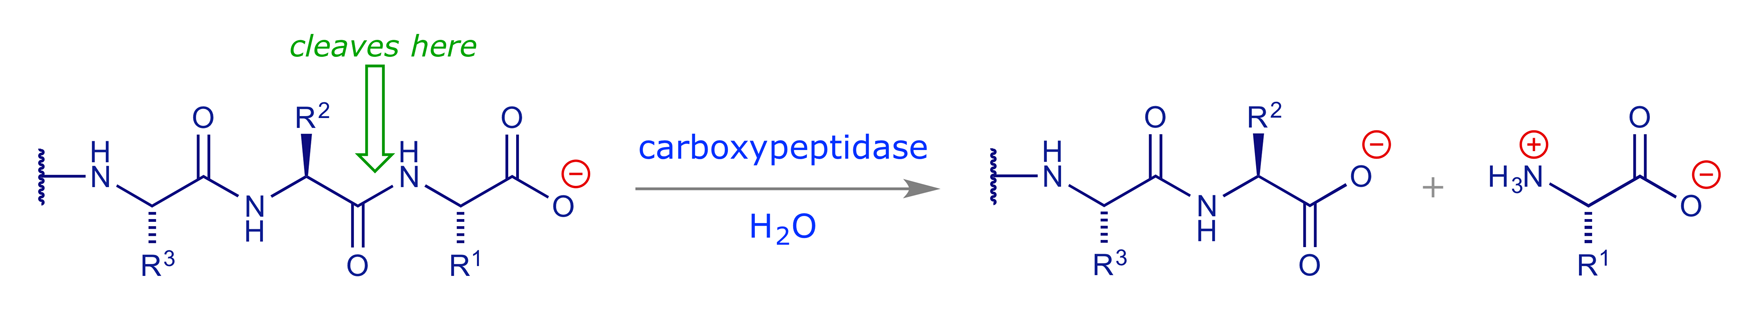 Reaction scheme showing where carboxypeptidase A cleaves a peptide chain